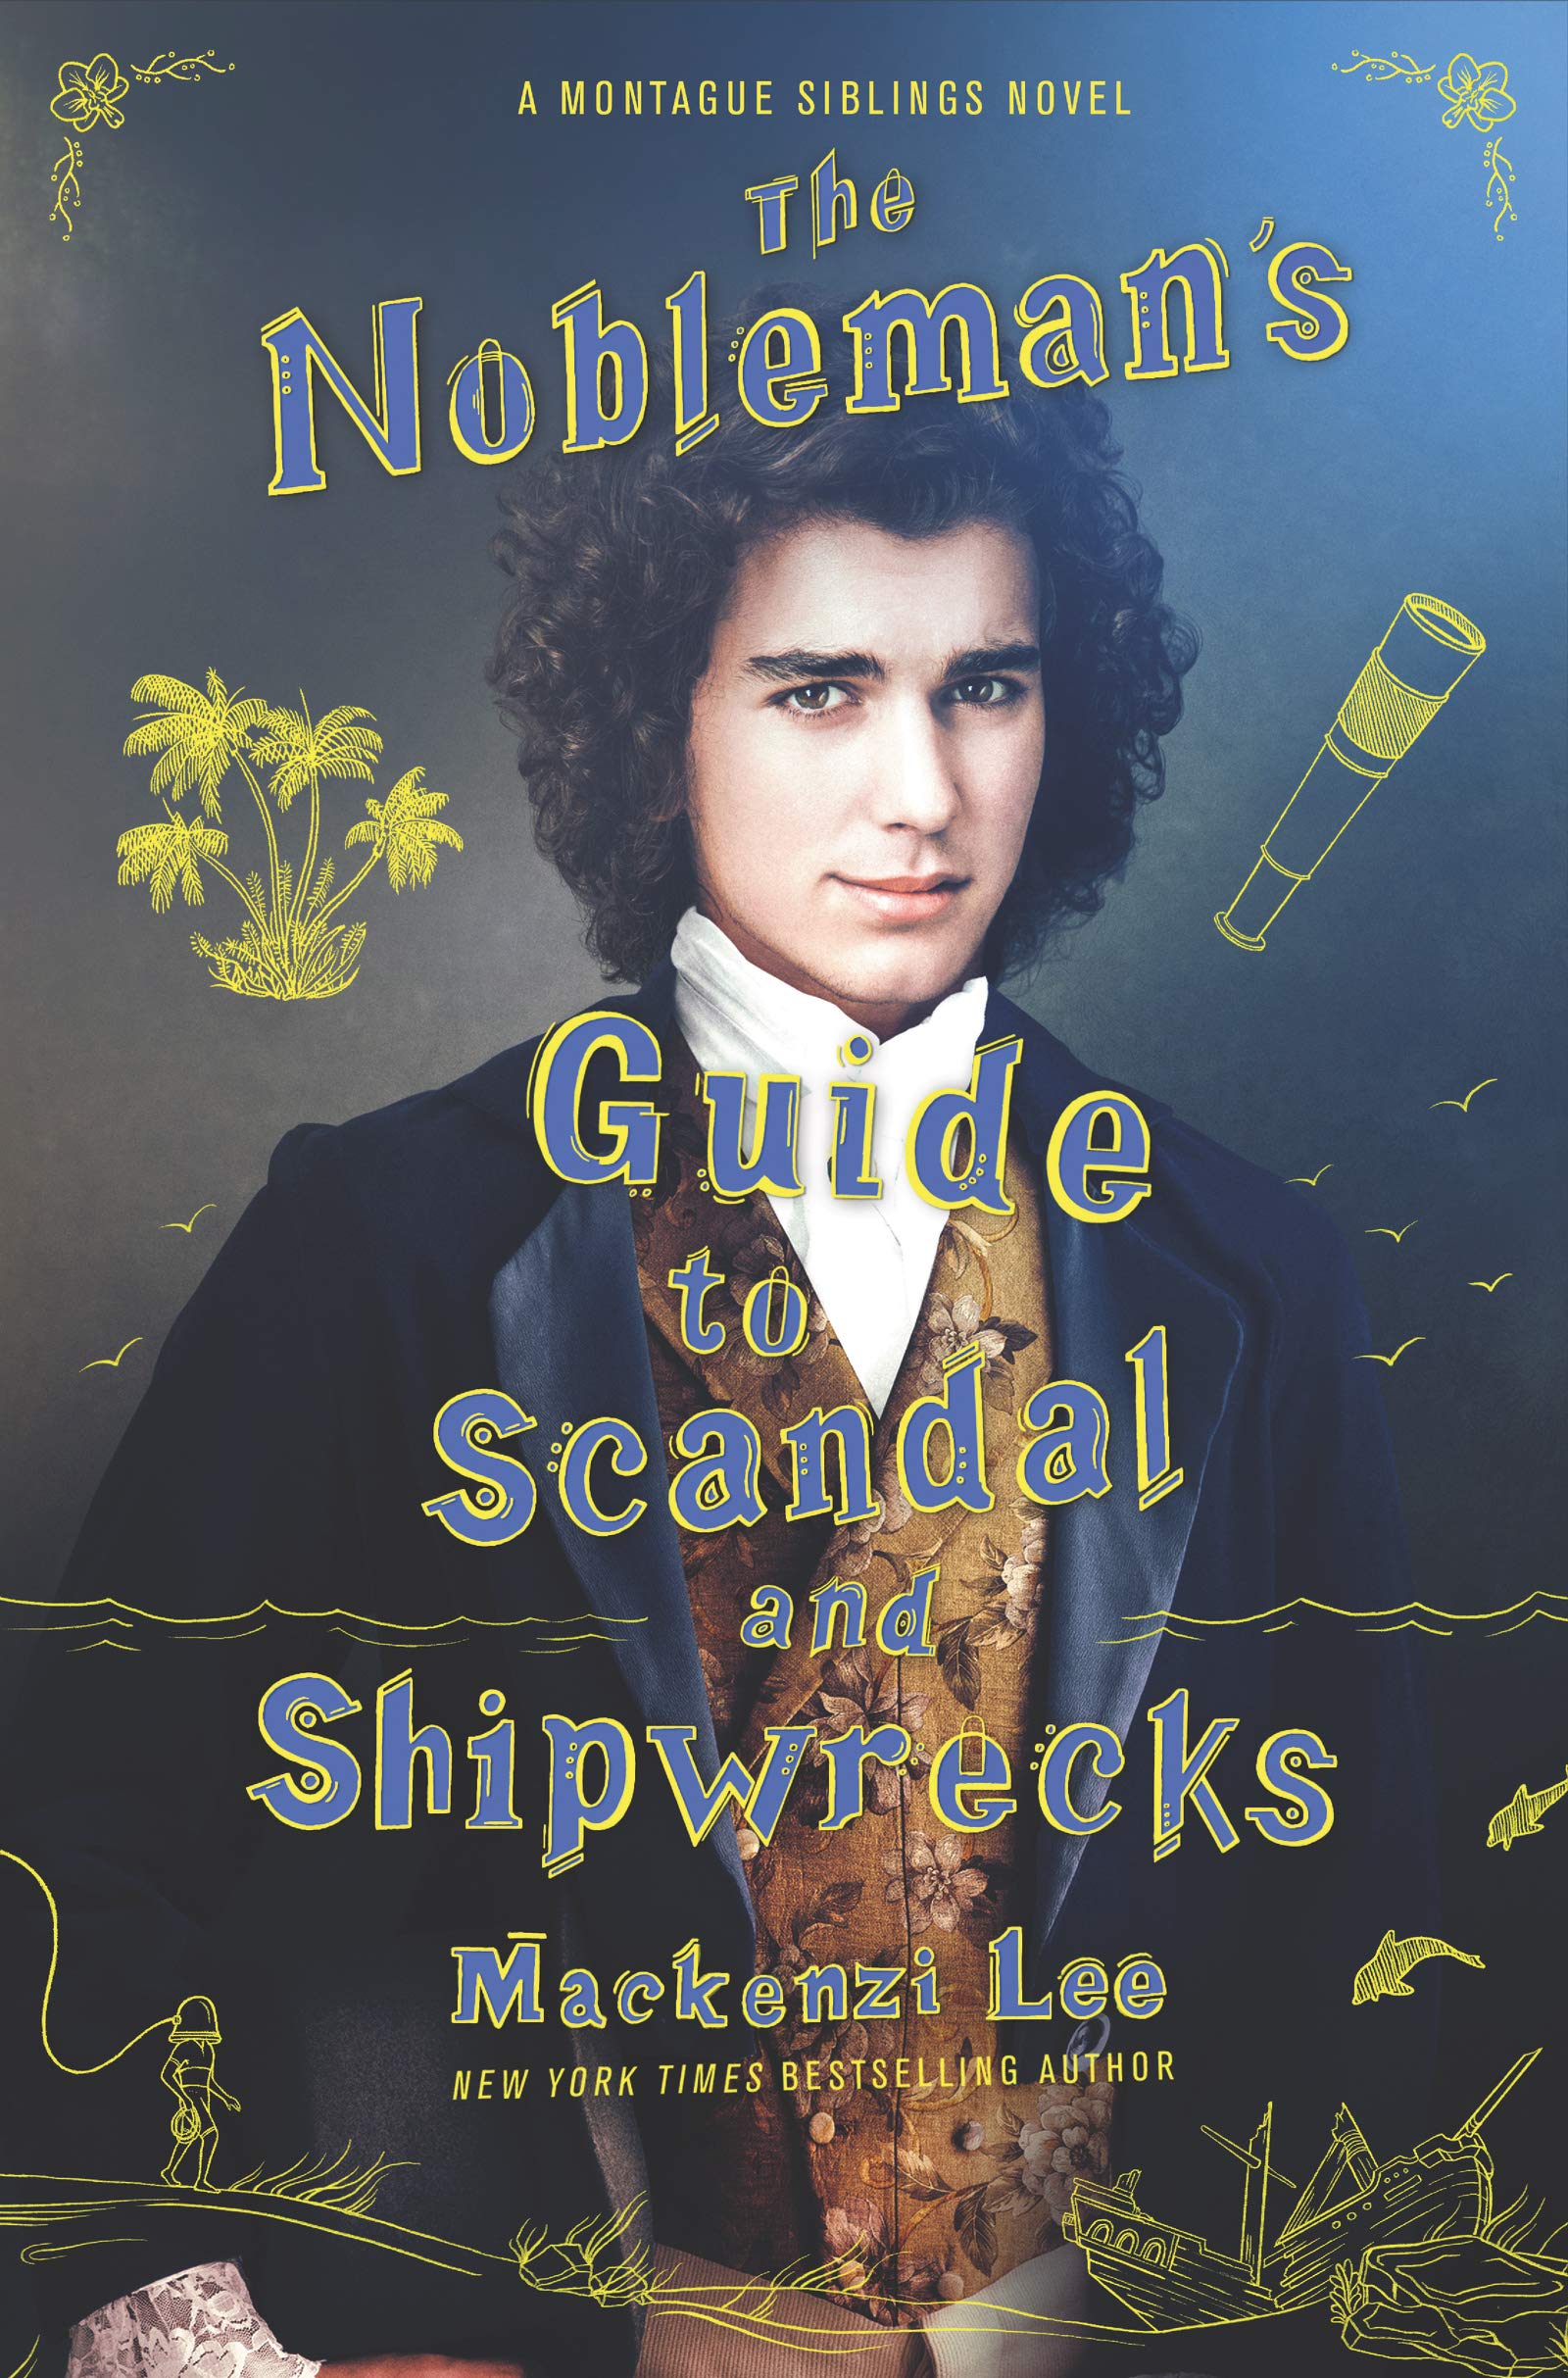 Cover of “The Nobleman’s Guide to Scandal and Shipwrecks” by Mackenzi Lee